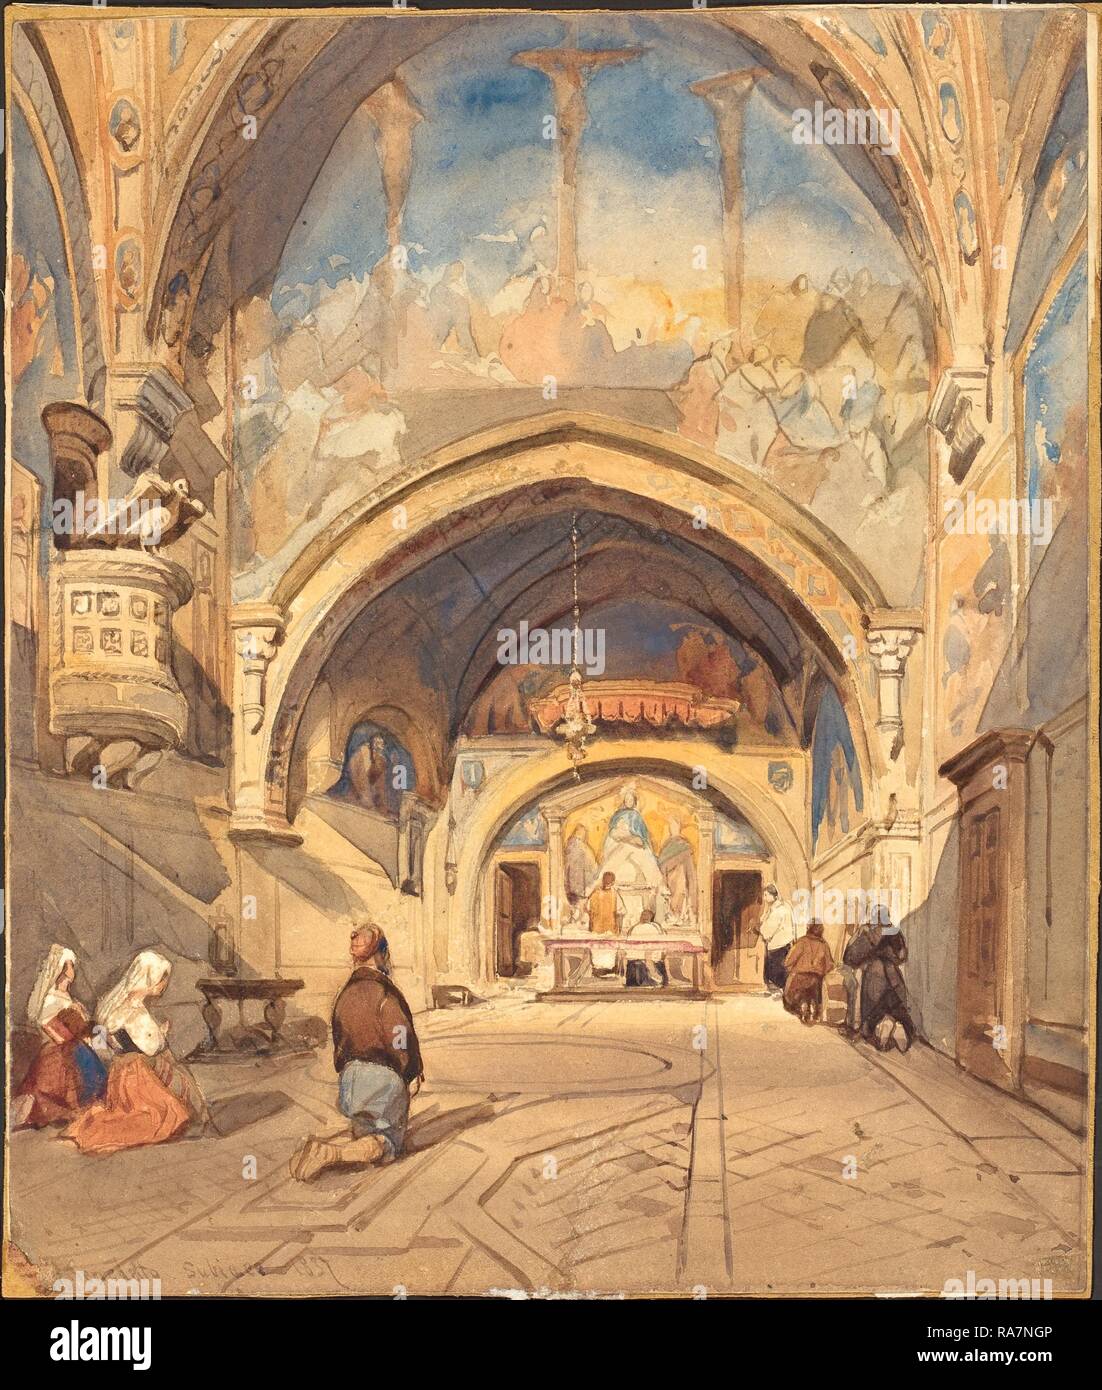 David Roberts (Scottish, 1796-1864), The Interior of the Church of San Benedetto, 1837, watercolor over graphite with reimagined Stock Photo